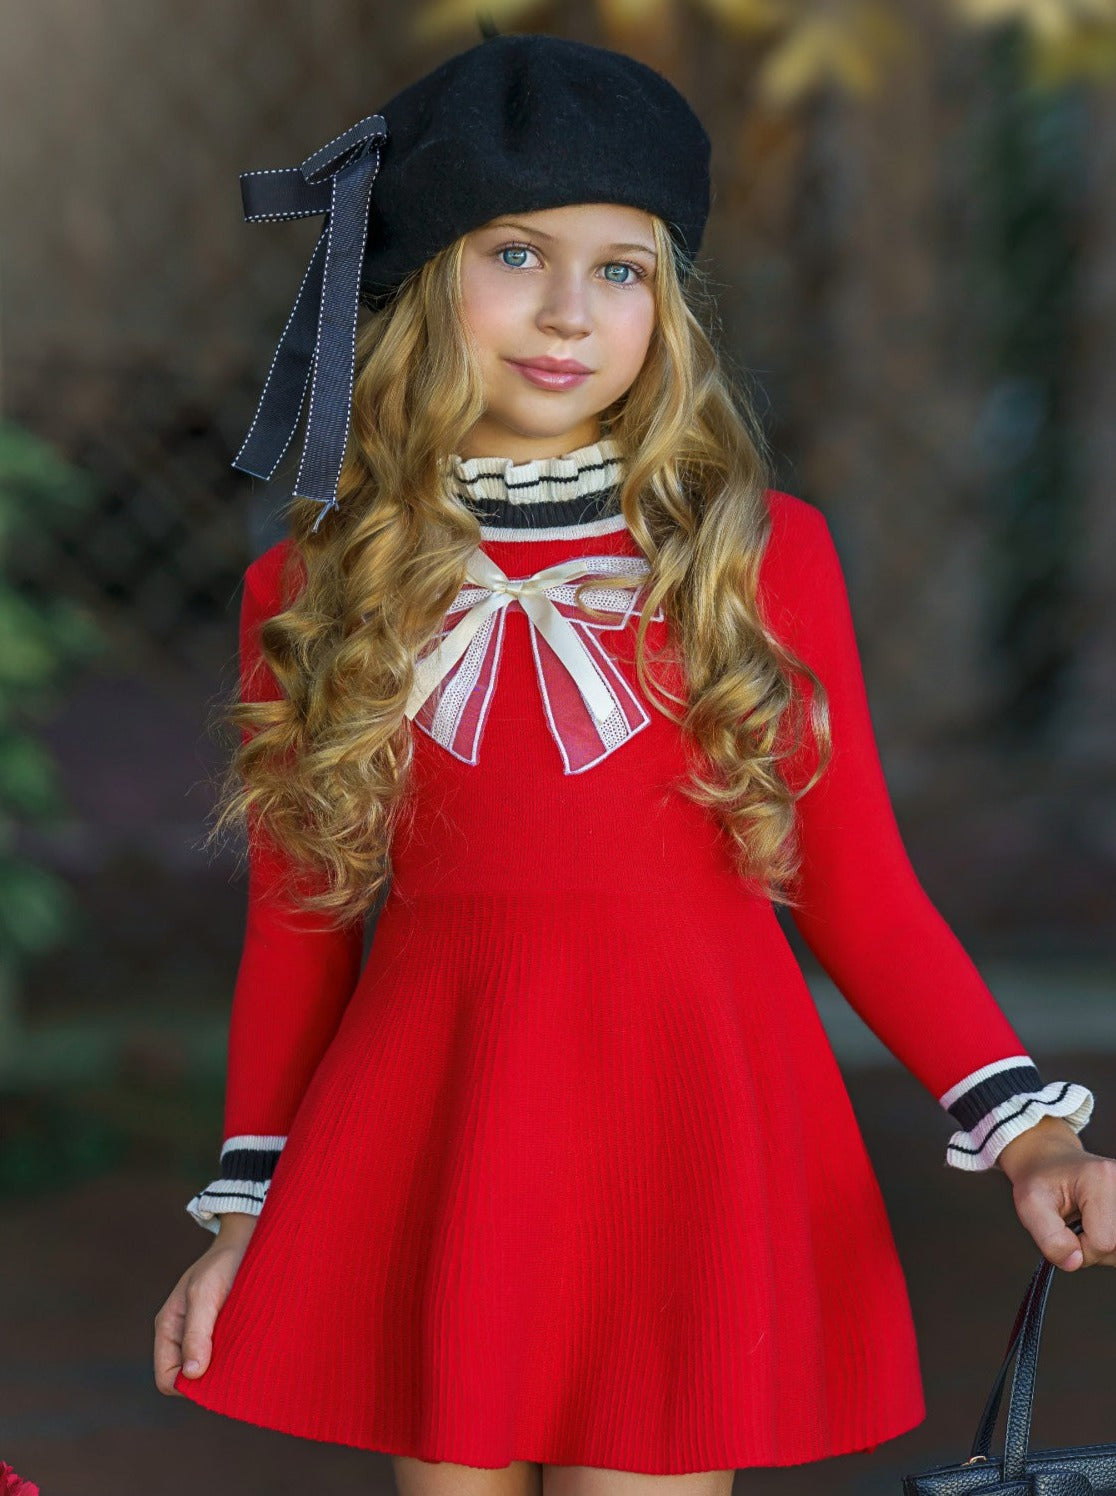 Preppy Chic Dresses | Red Big Bow Sweater Dress | Mia Belle Girls